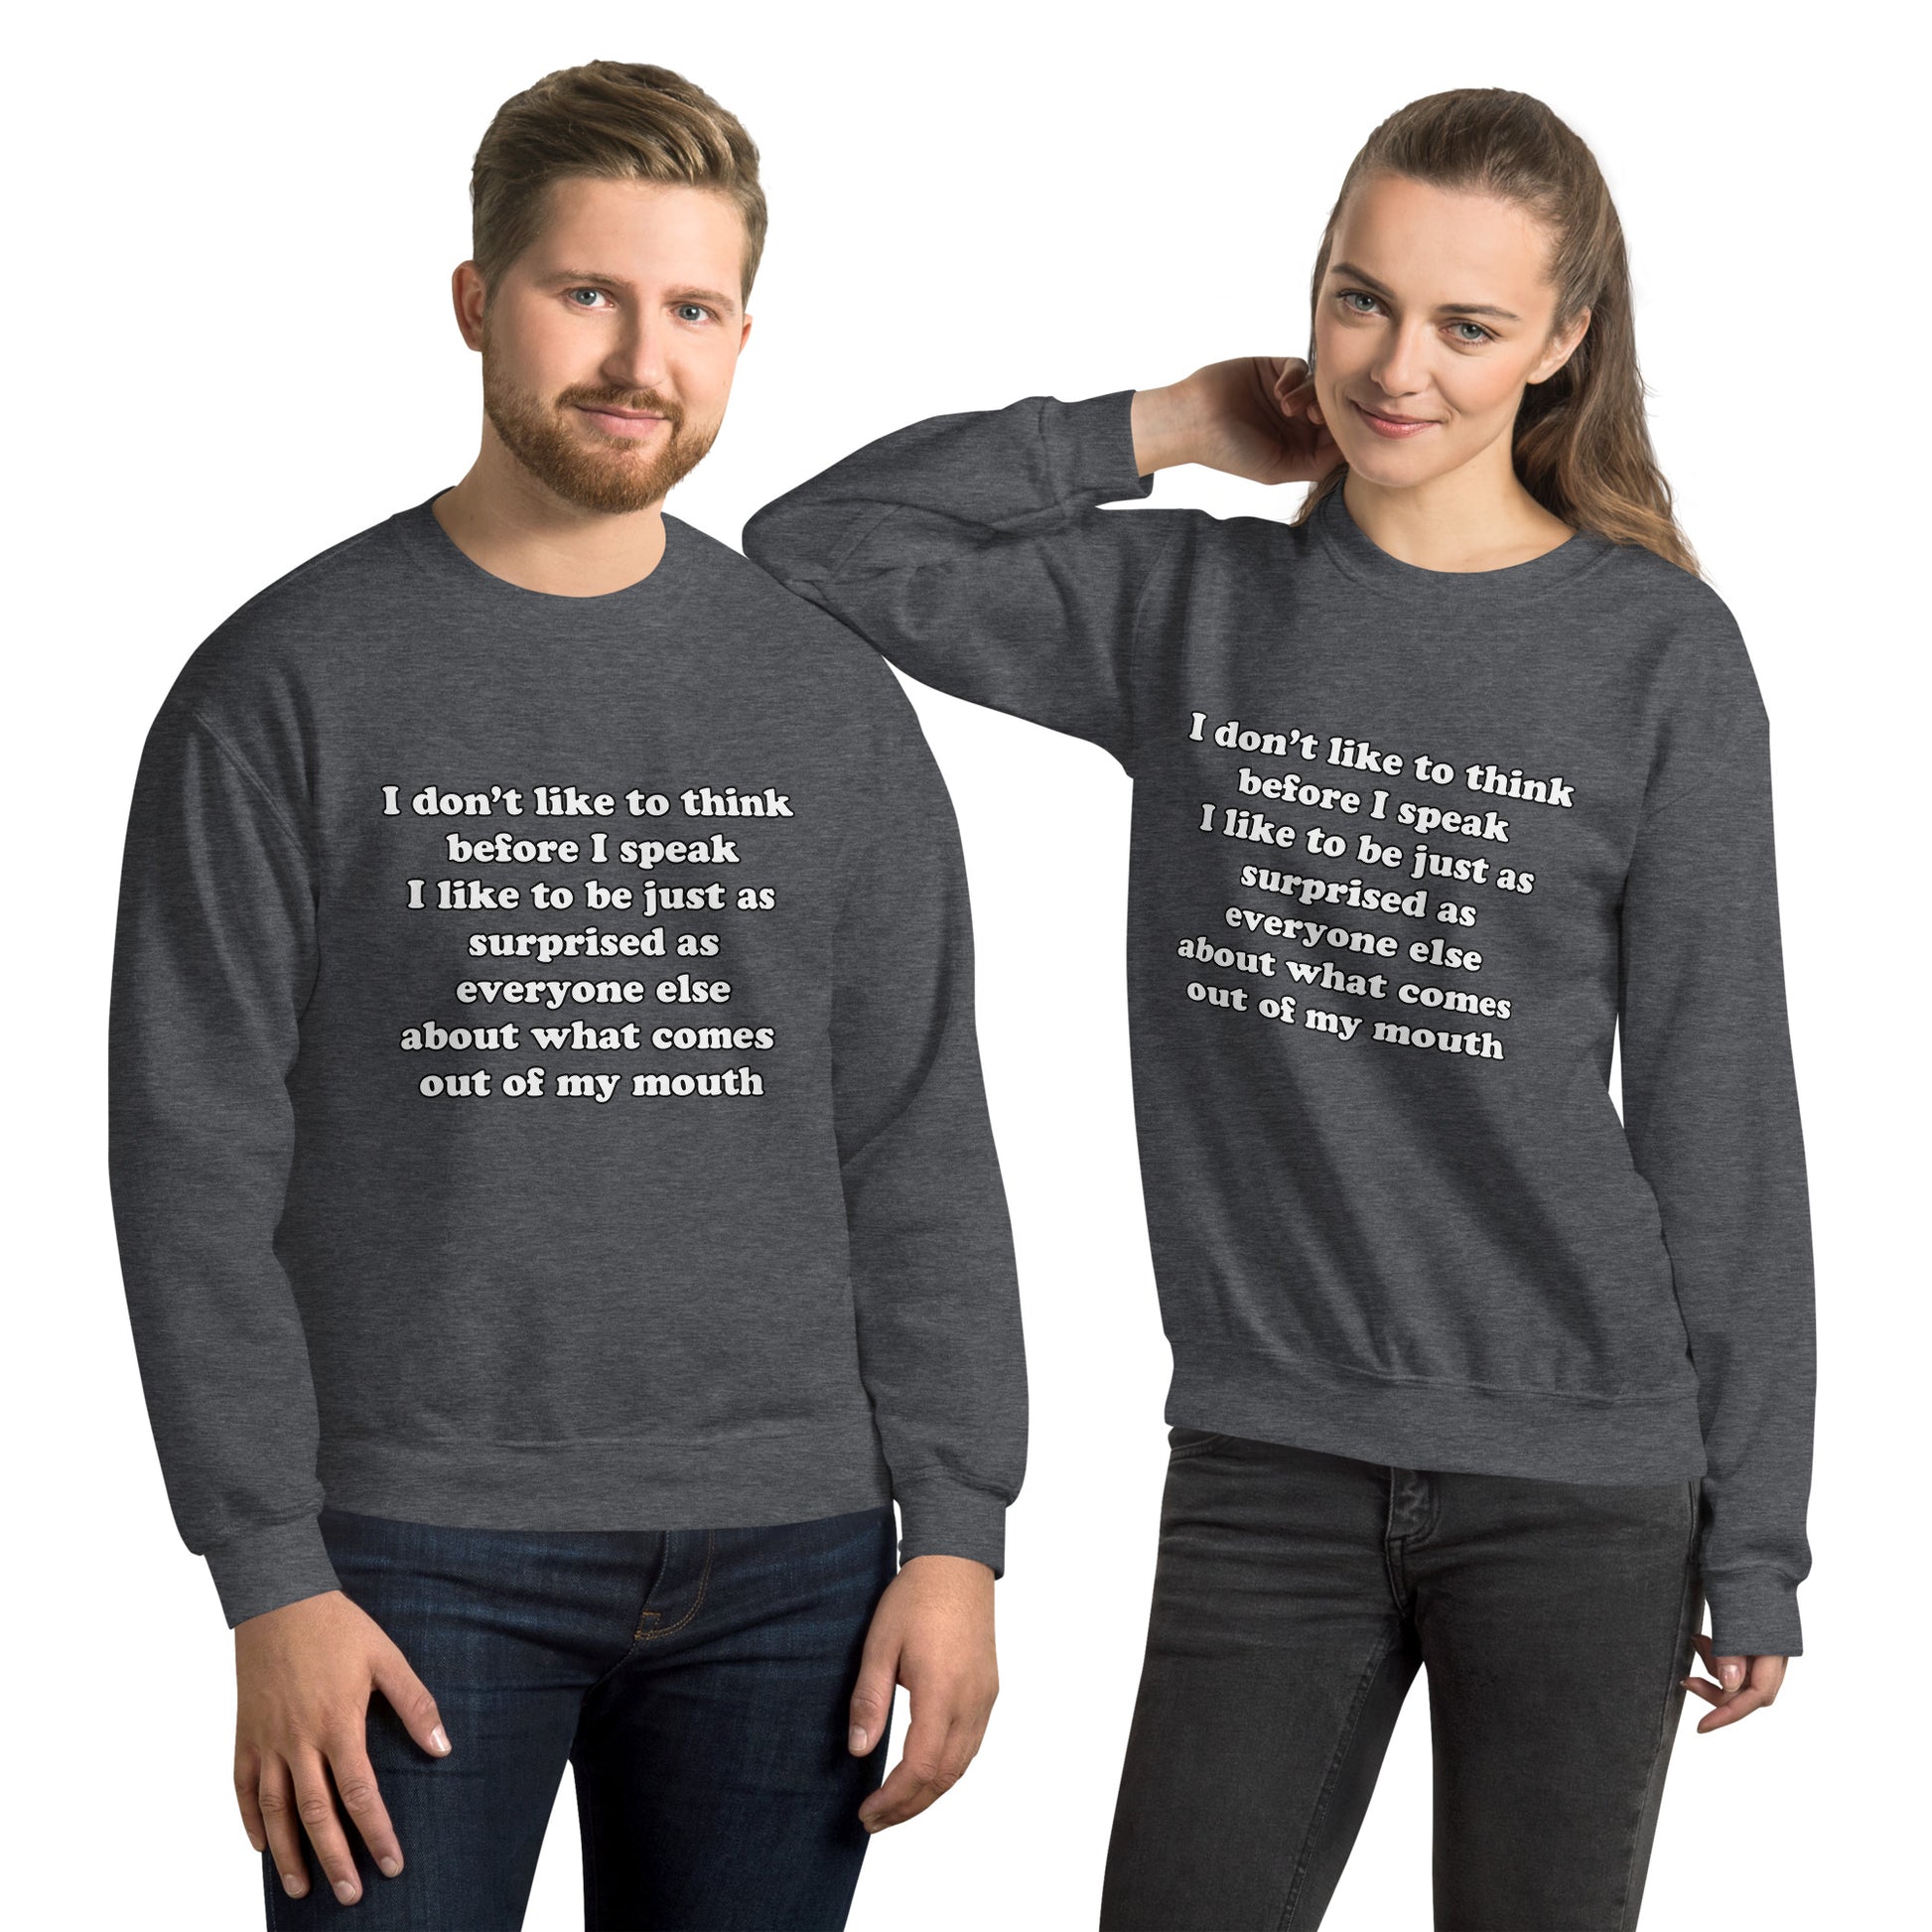 Man and woman with dark grey sweatshirt with text “I don't think before I speak Just as serprised as everyone about what comes out of my mouth"